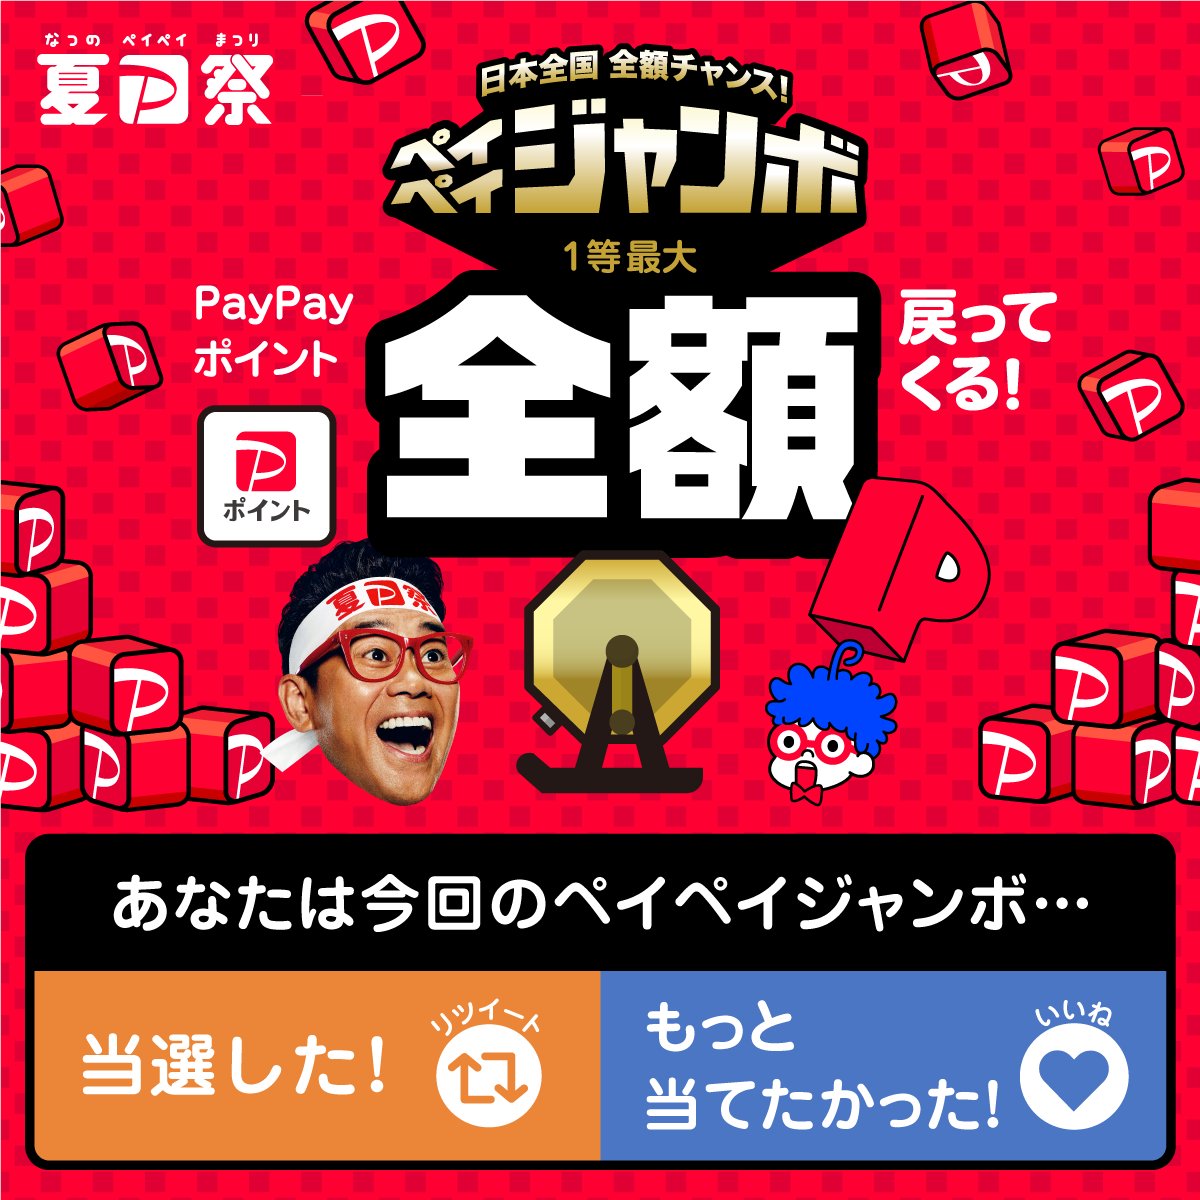 Paypay株式会社 Paypayofficial Twitter